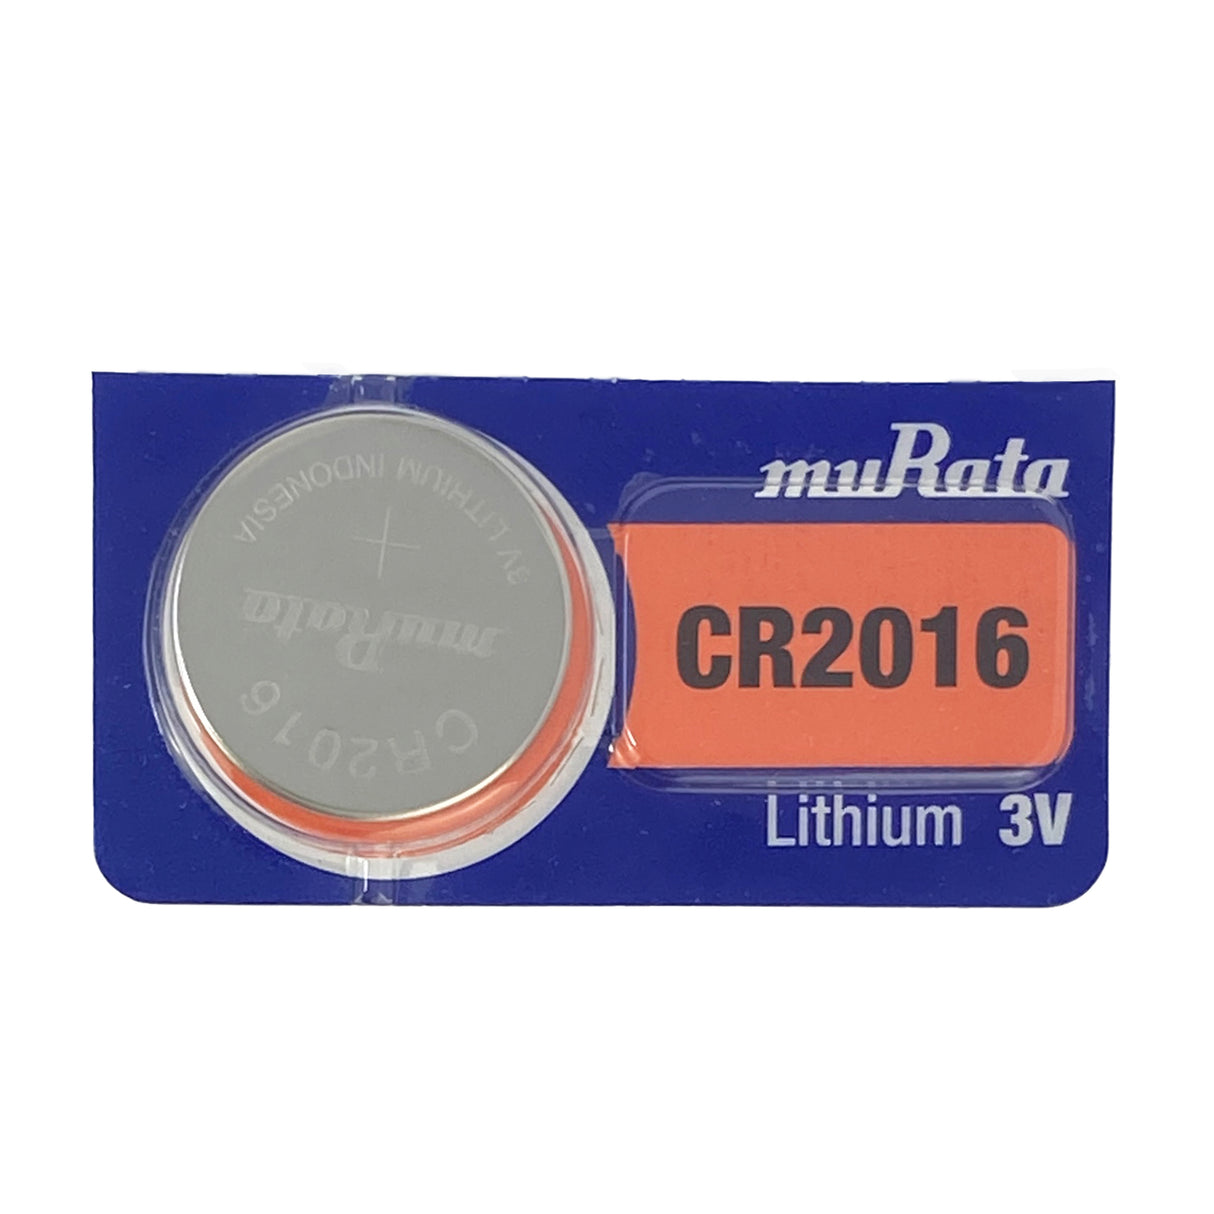 CR2016 Coin Cell Lithium Ion 3V Battery